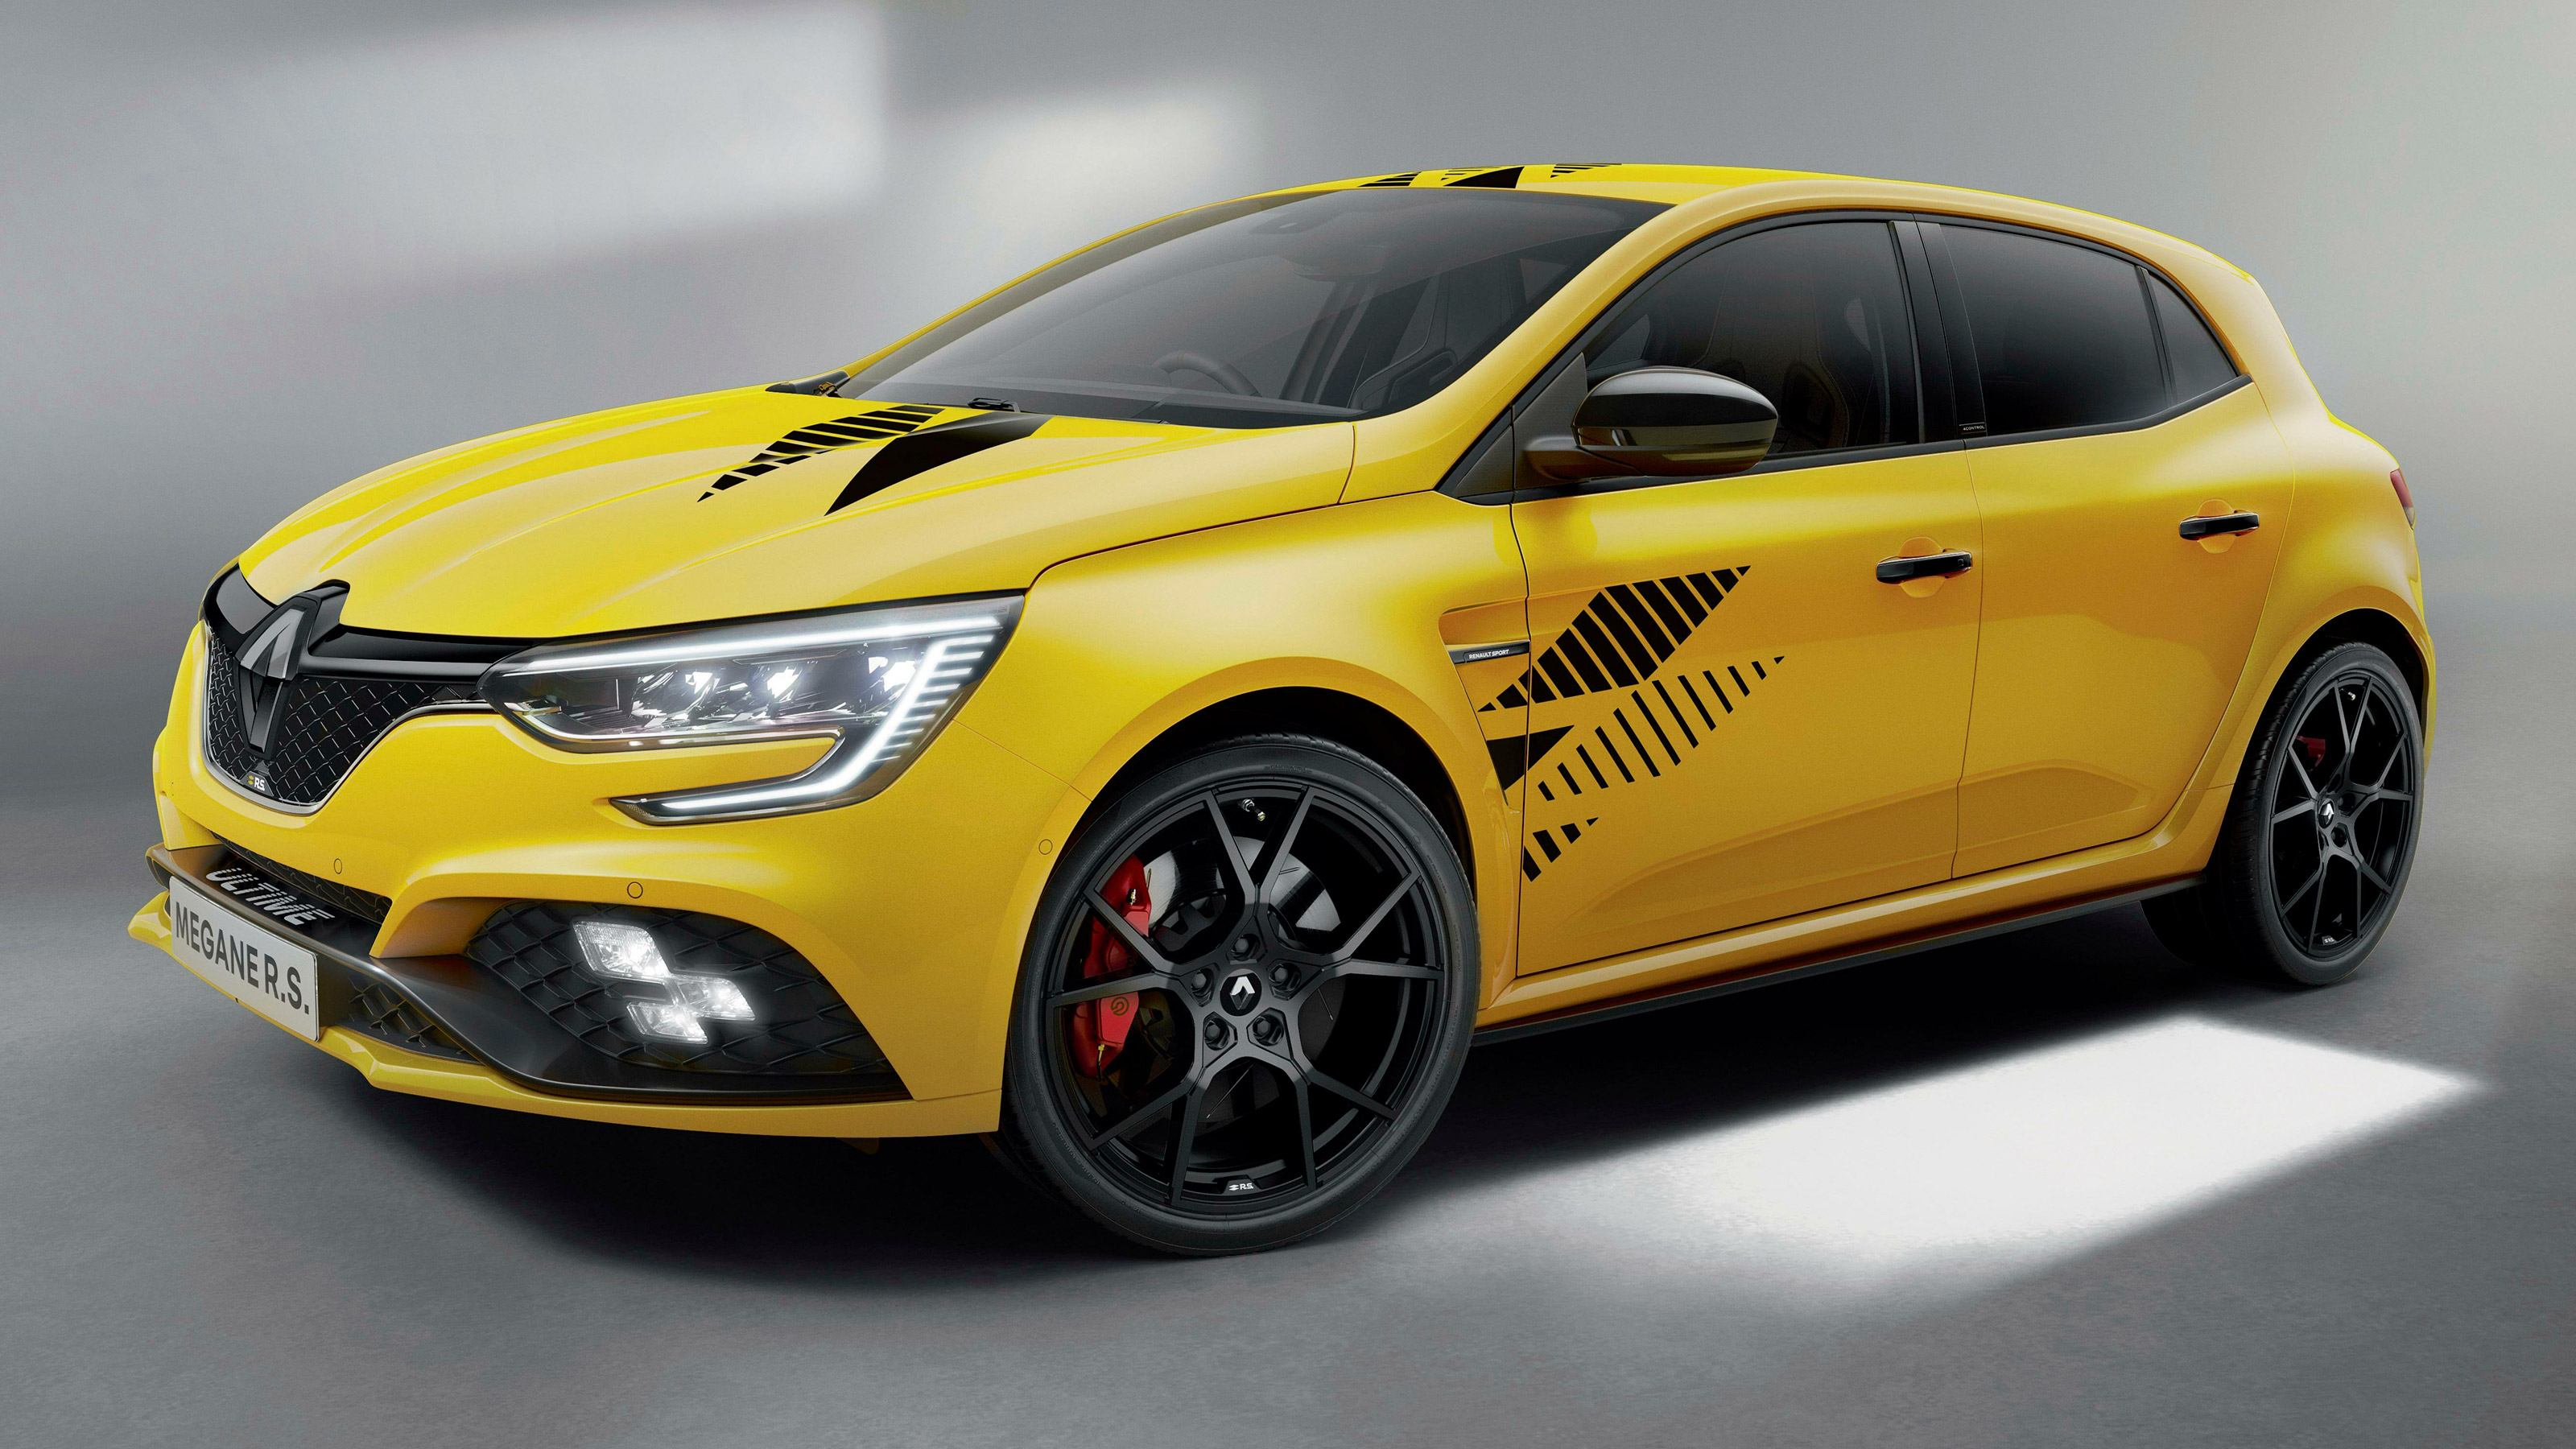 Renault Sport's greatest cars: road and track highlights from